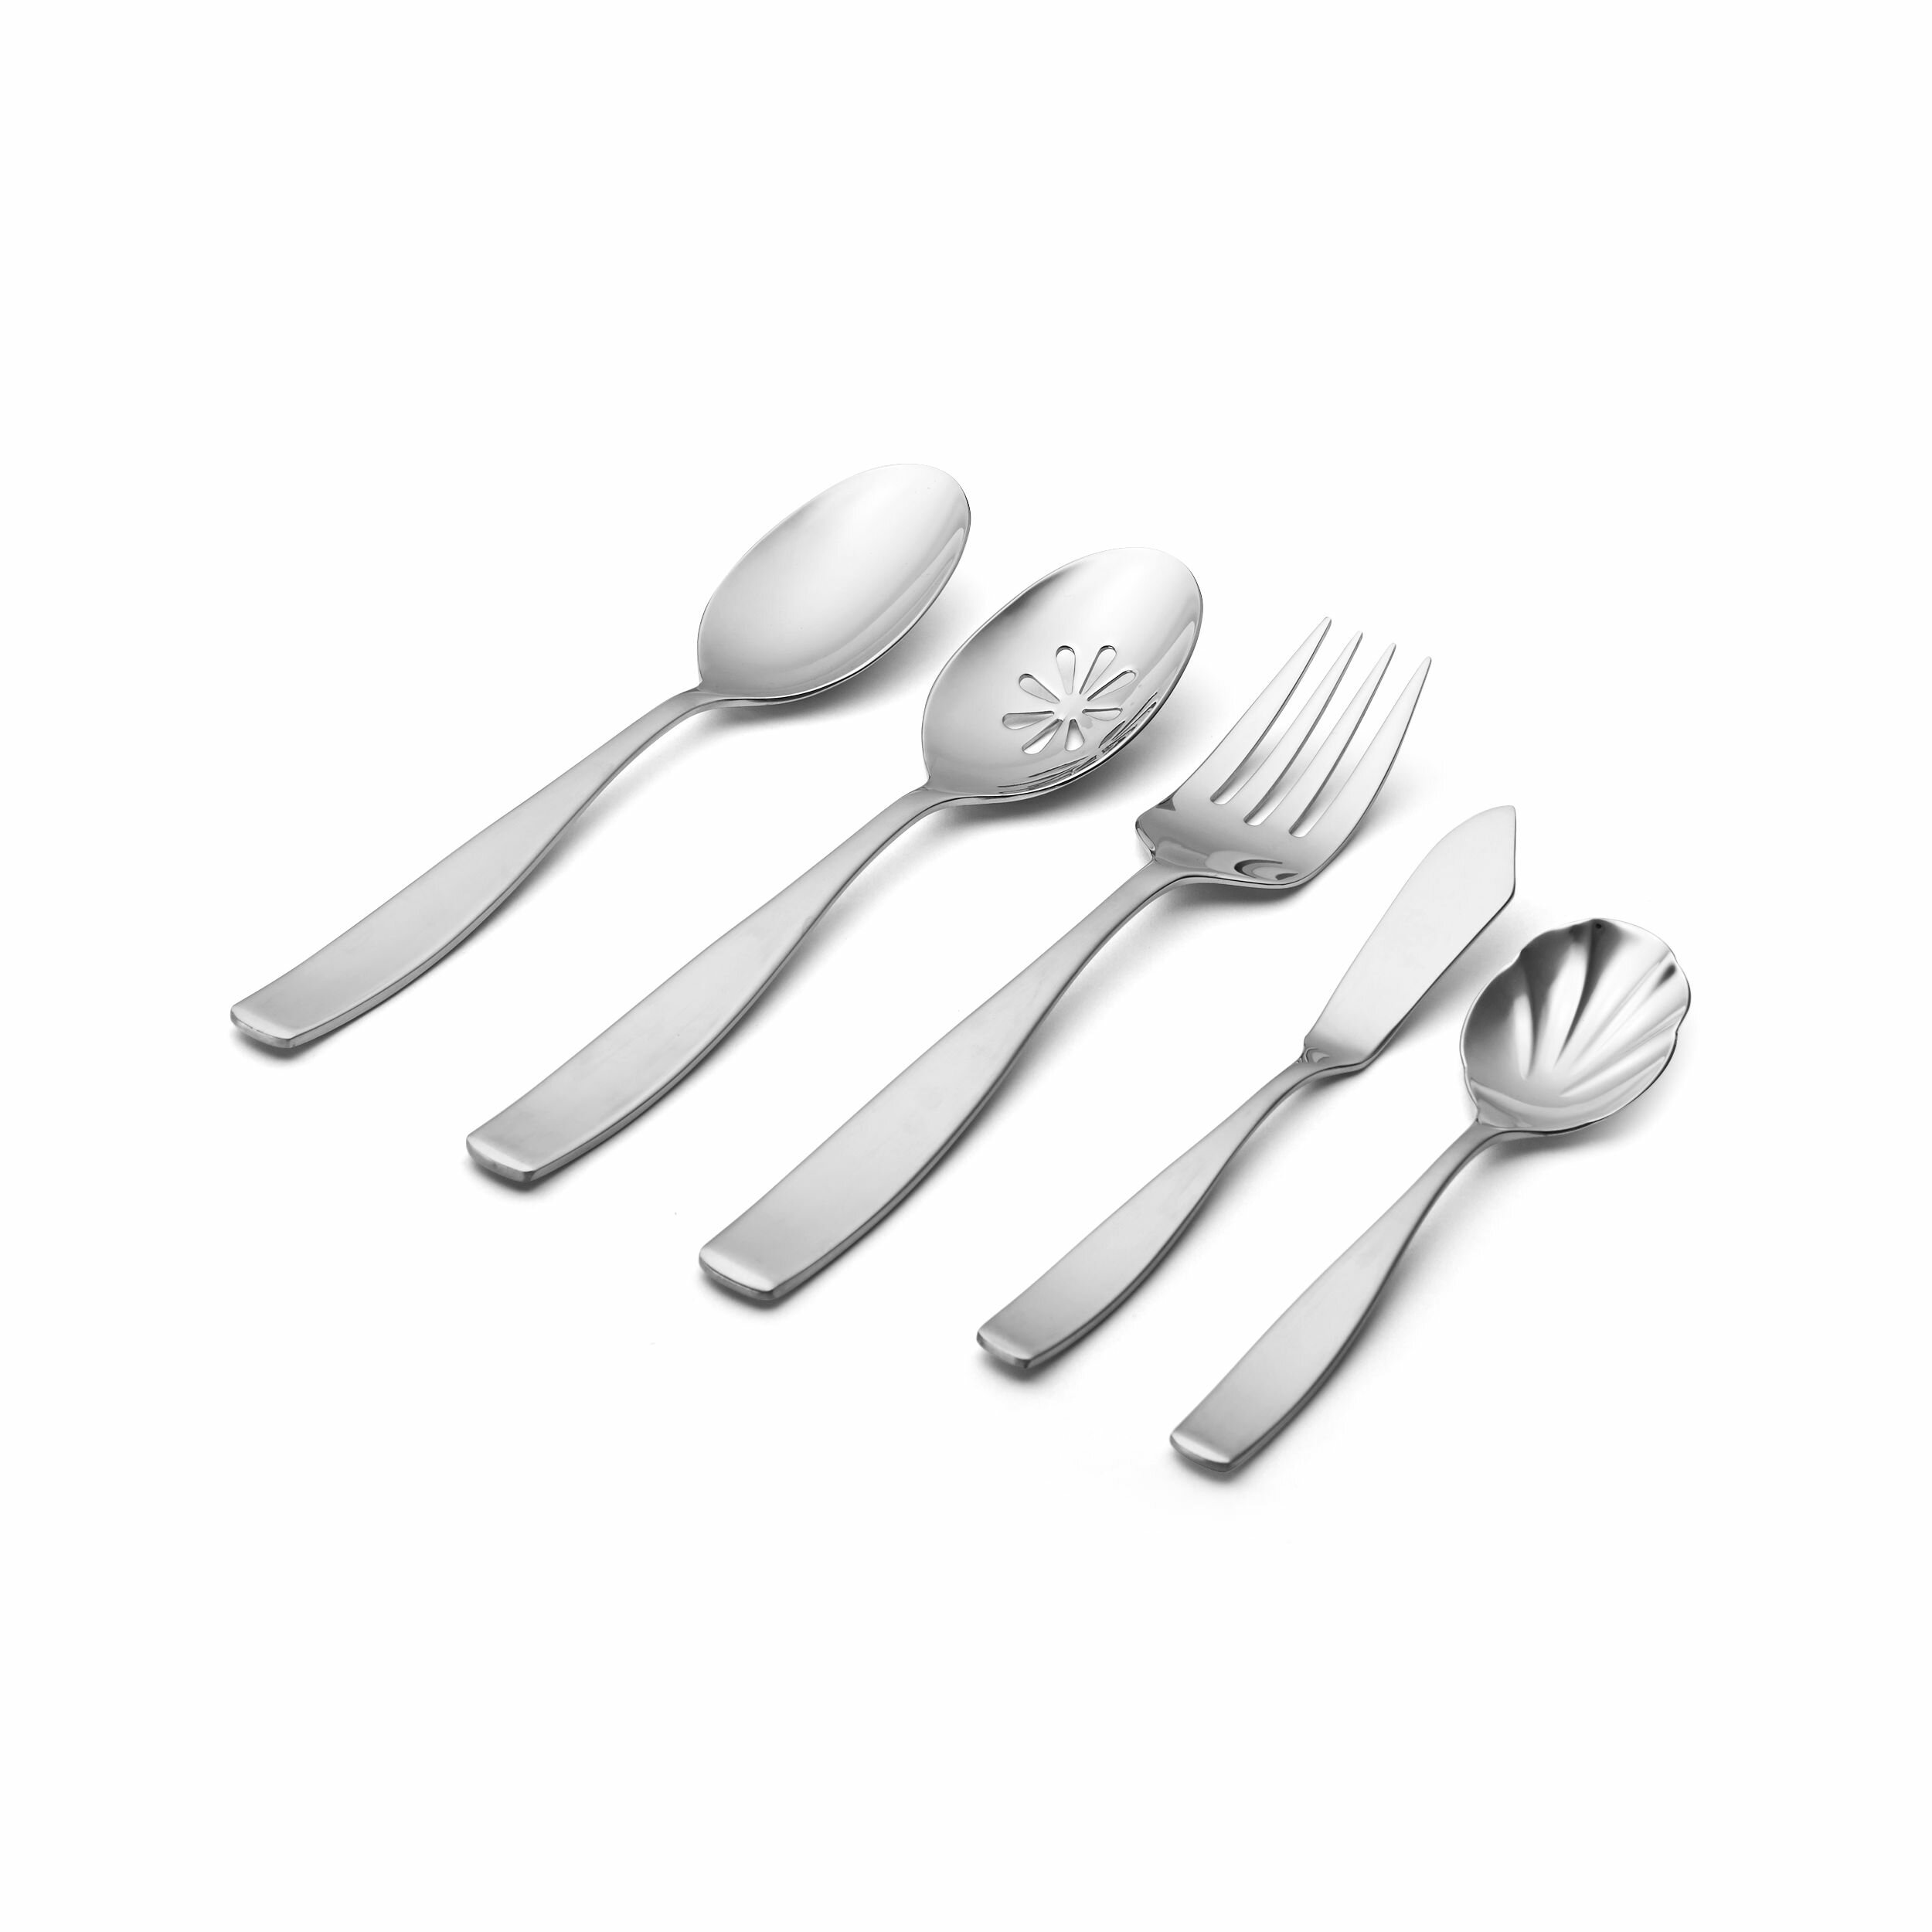 Stainless Steel 14 Long Serving & Cooking Spoons 5 Pcs Set #21435